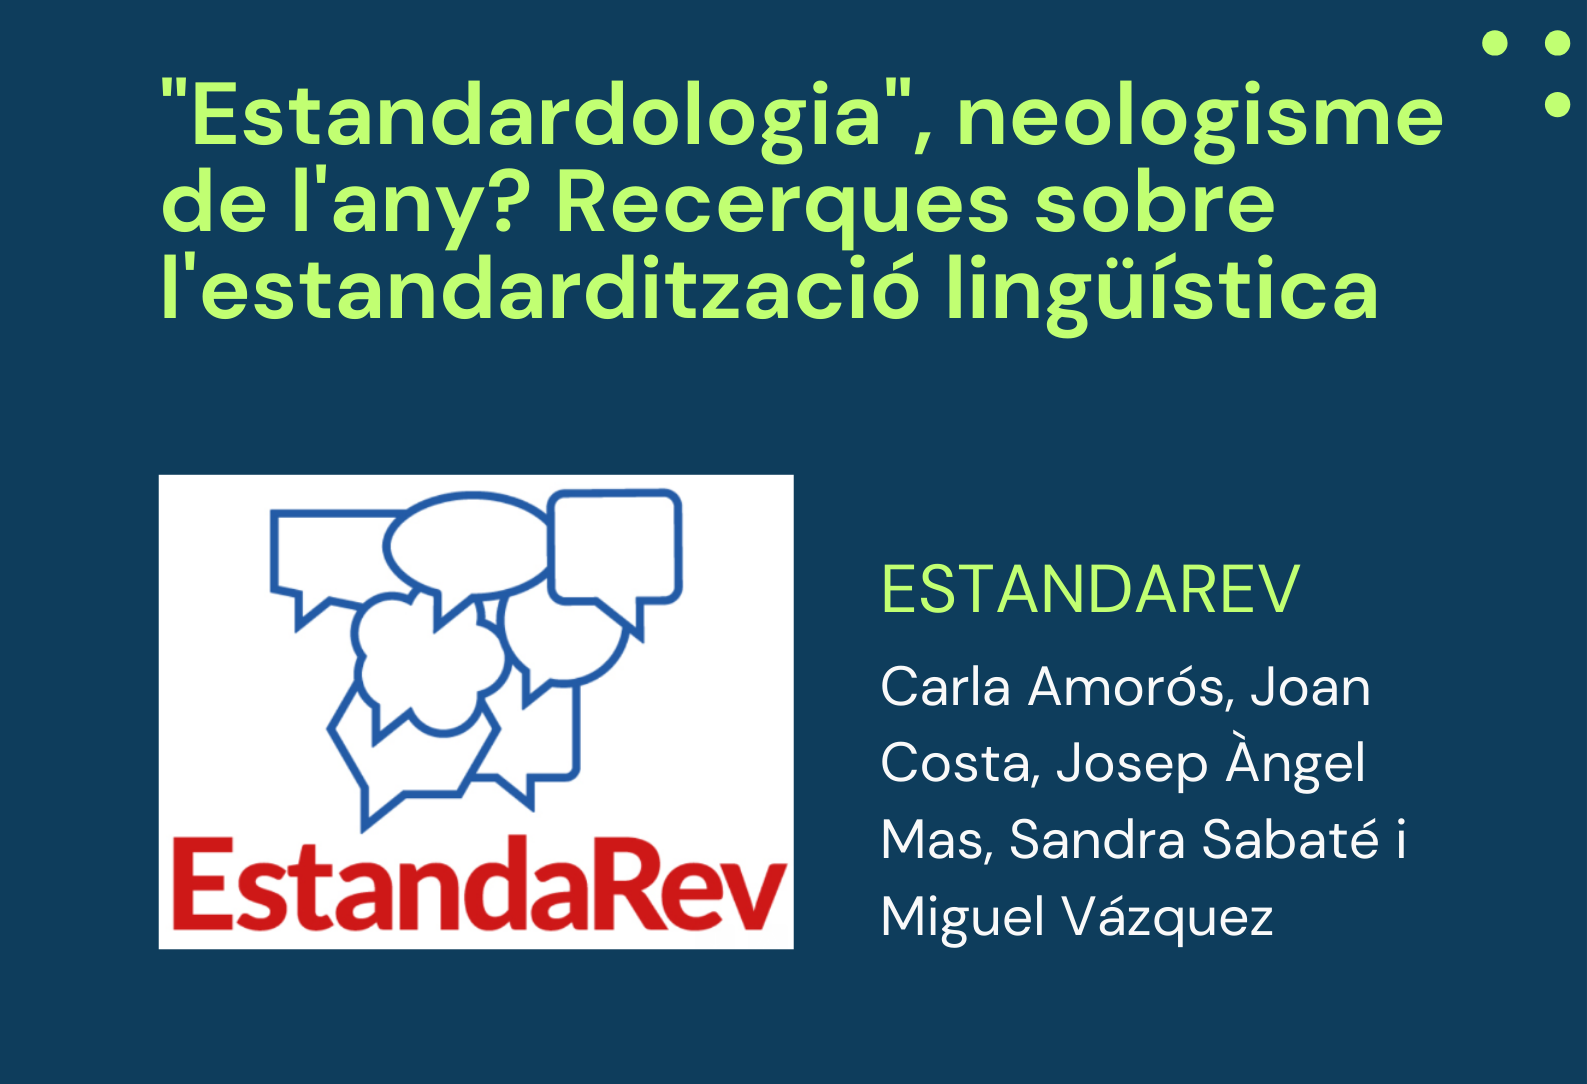 Seminar “‘Standardology’, neologism of the year? Research on linguistic standardization”